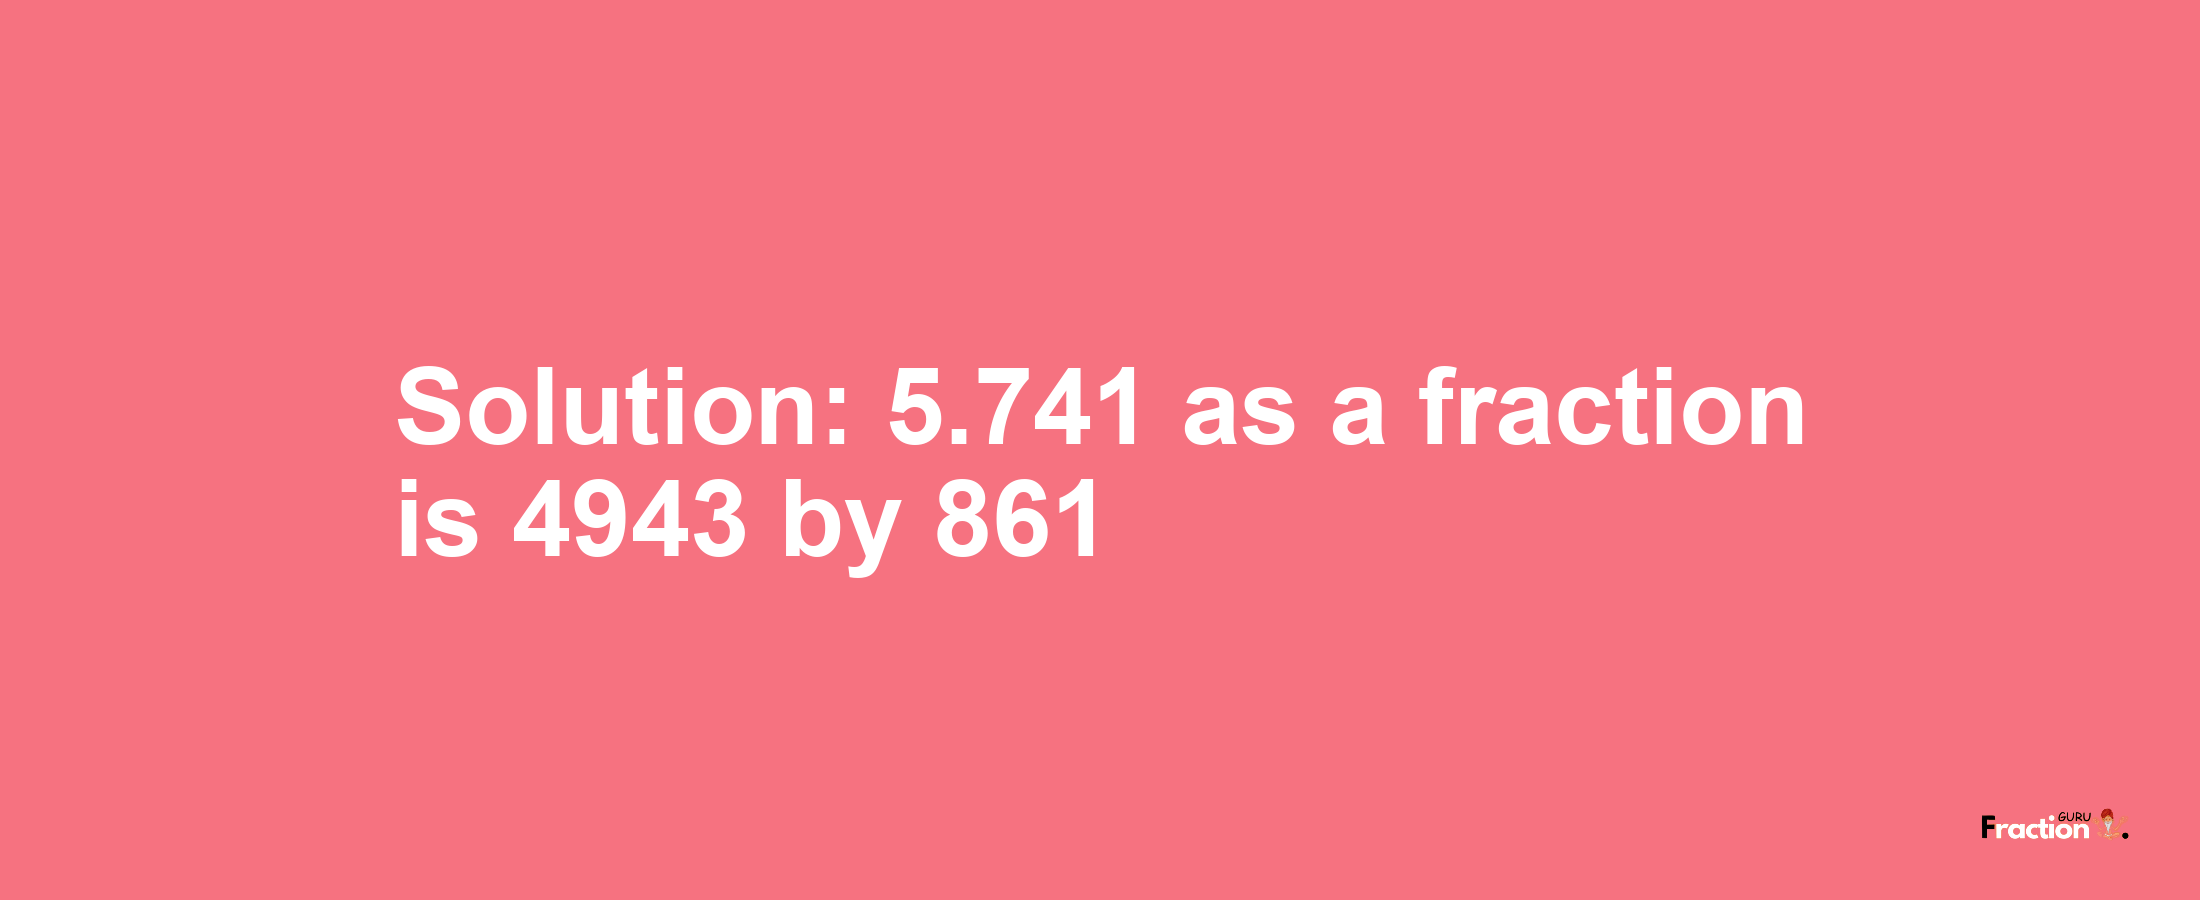 Solution:5.741 as a fraction is 4943/861